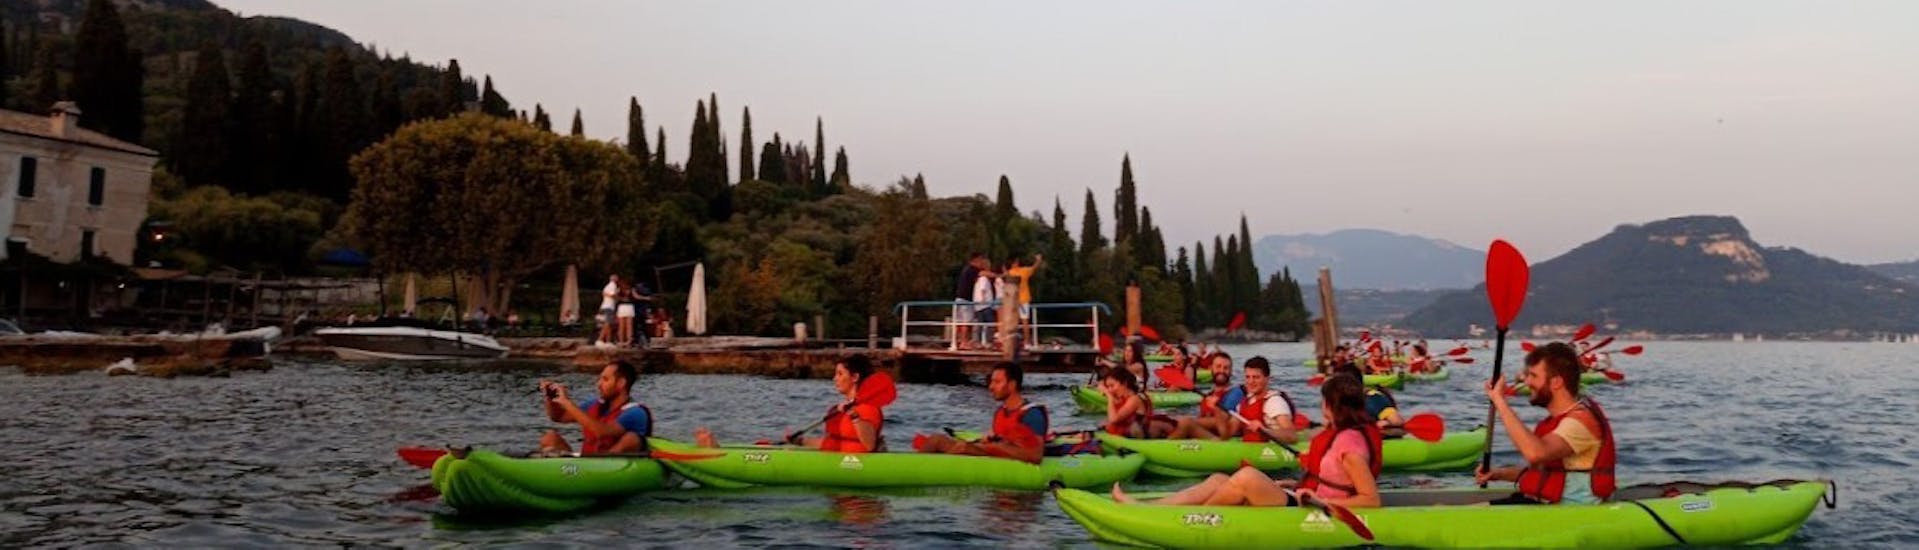 View of the sunset during the Sunset Kayaking on Lake Garda for Families and Friends with Xadventure Outdoor Lake Garda.